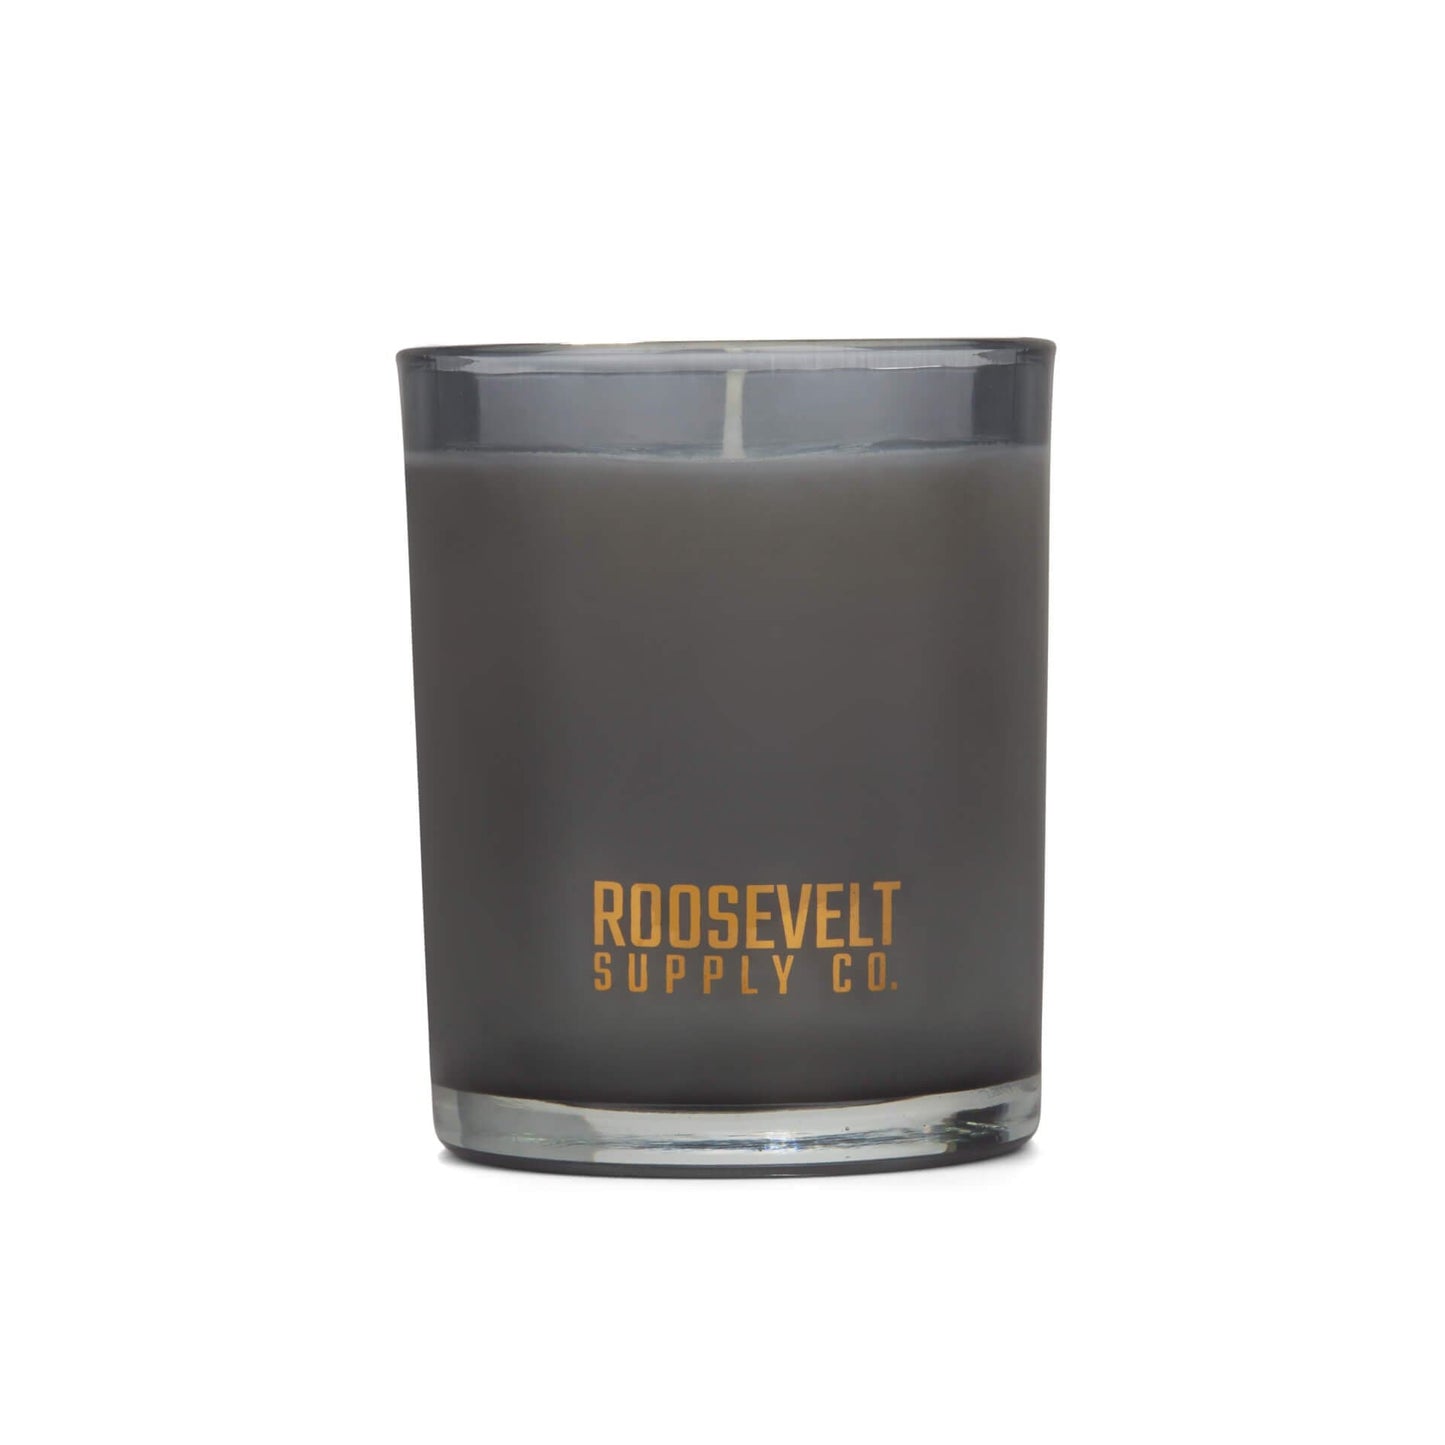 Death Valley National Park Candle - The Roosevelts Candle Co.